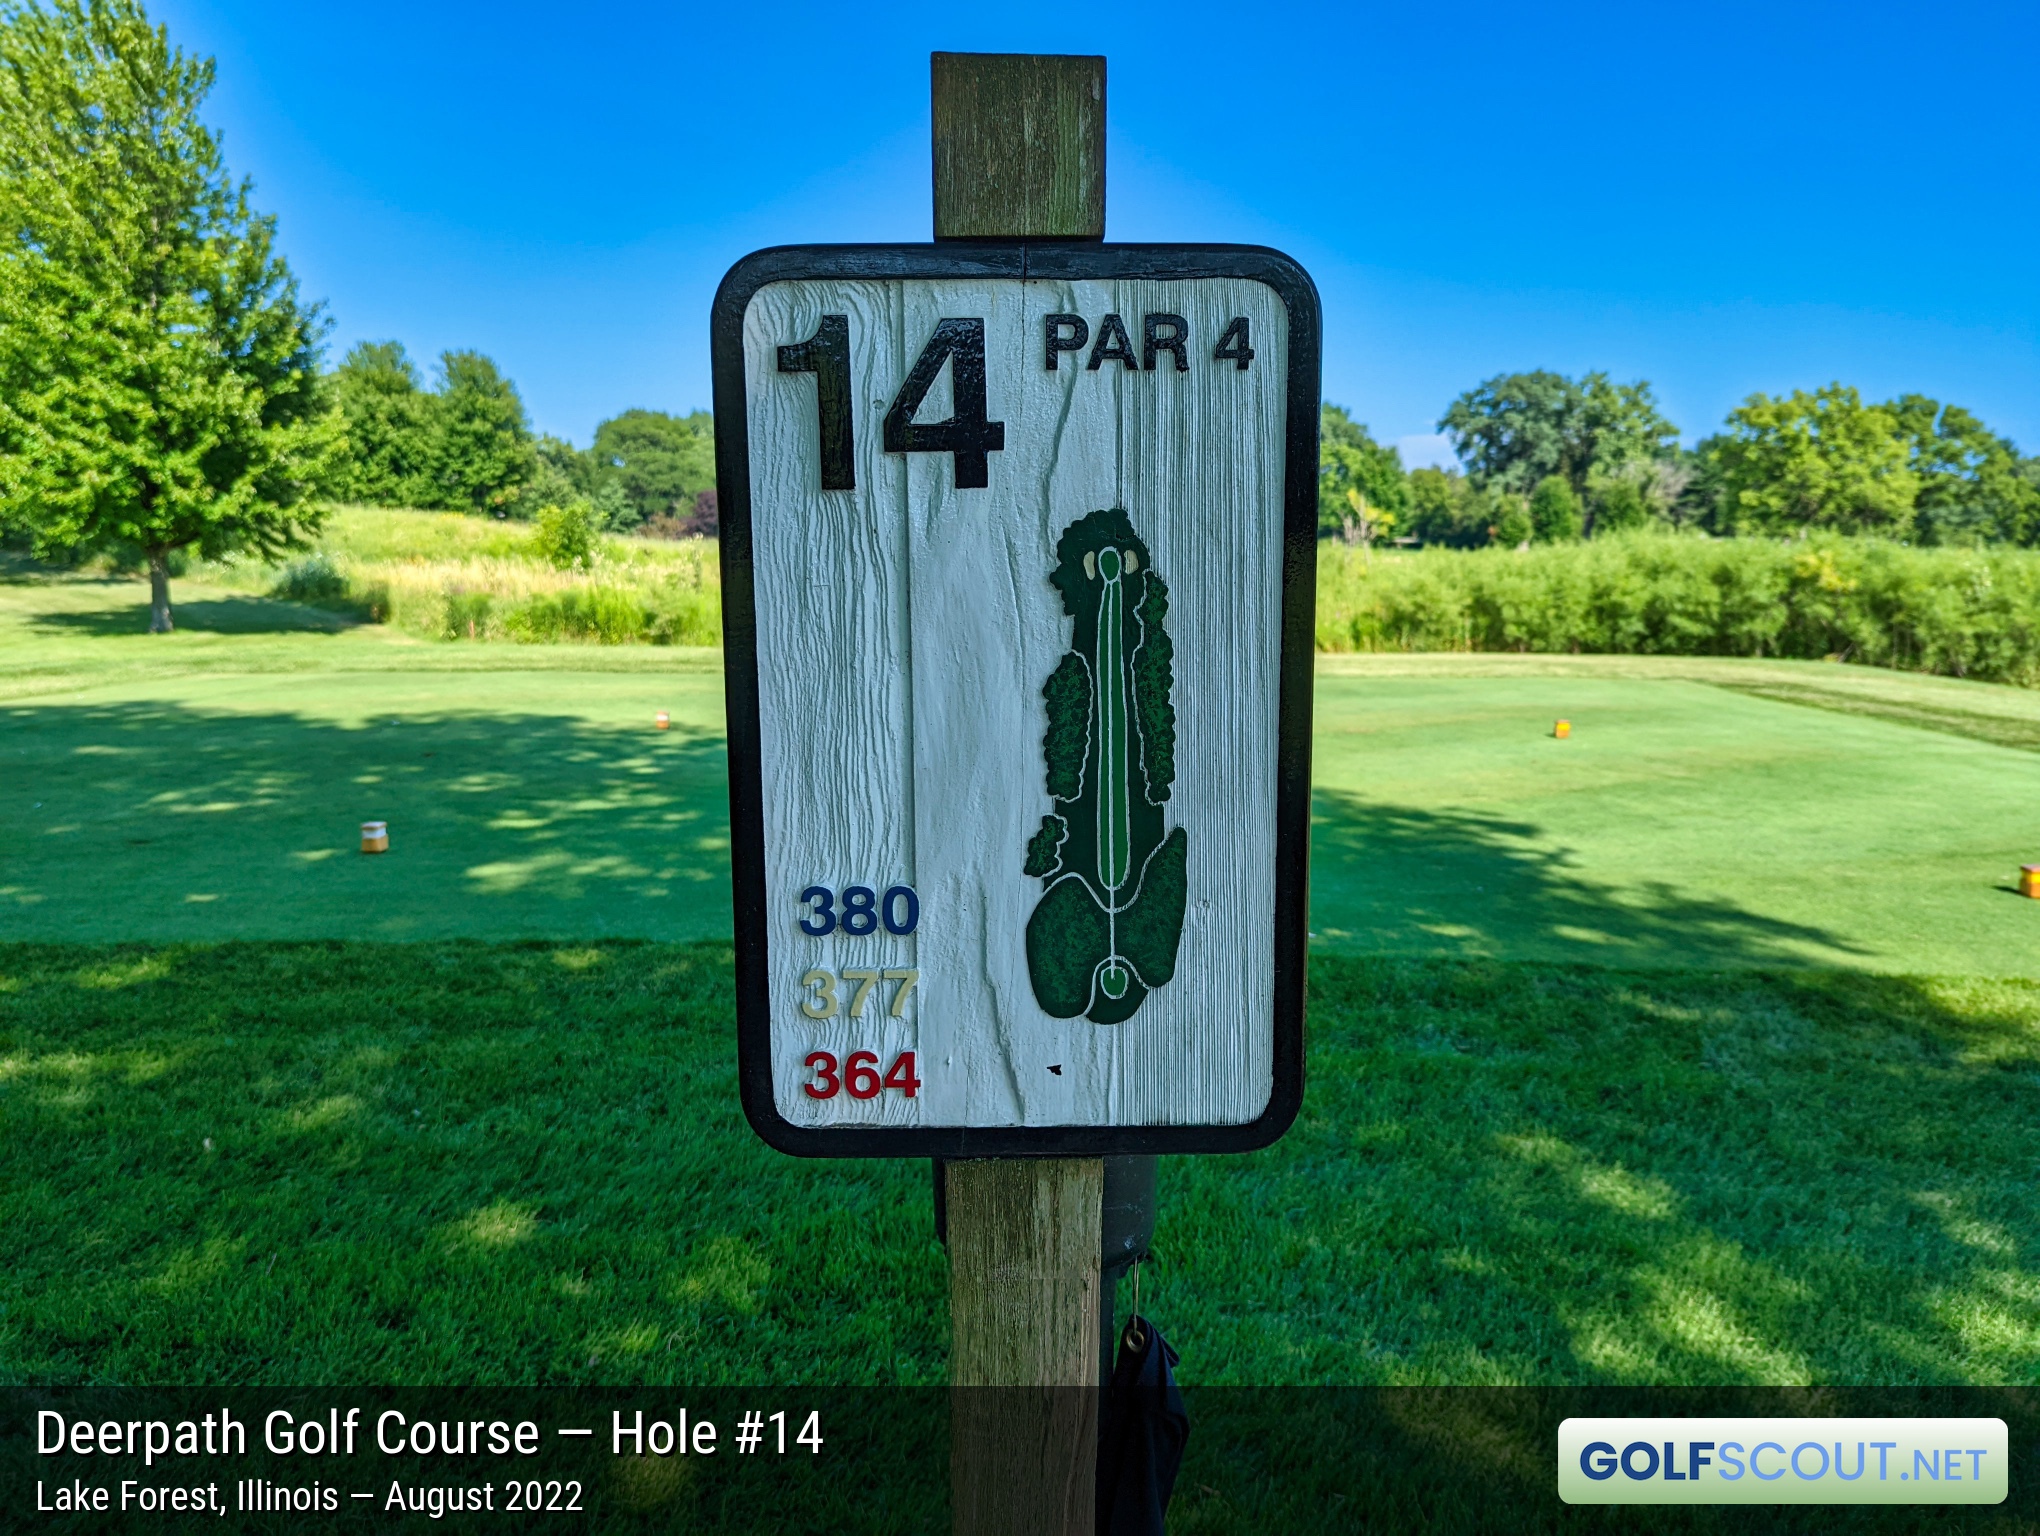 Photo of hole #14 at Deerpath Golf Course in Lake Forest, Illinois. 